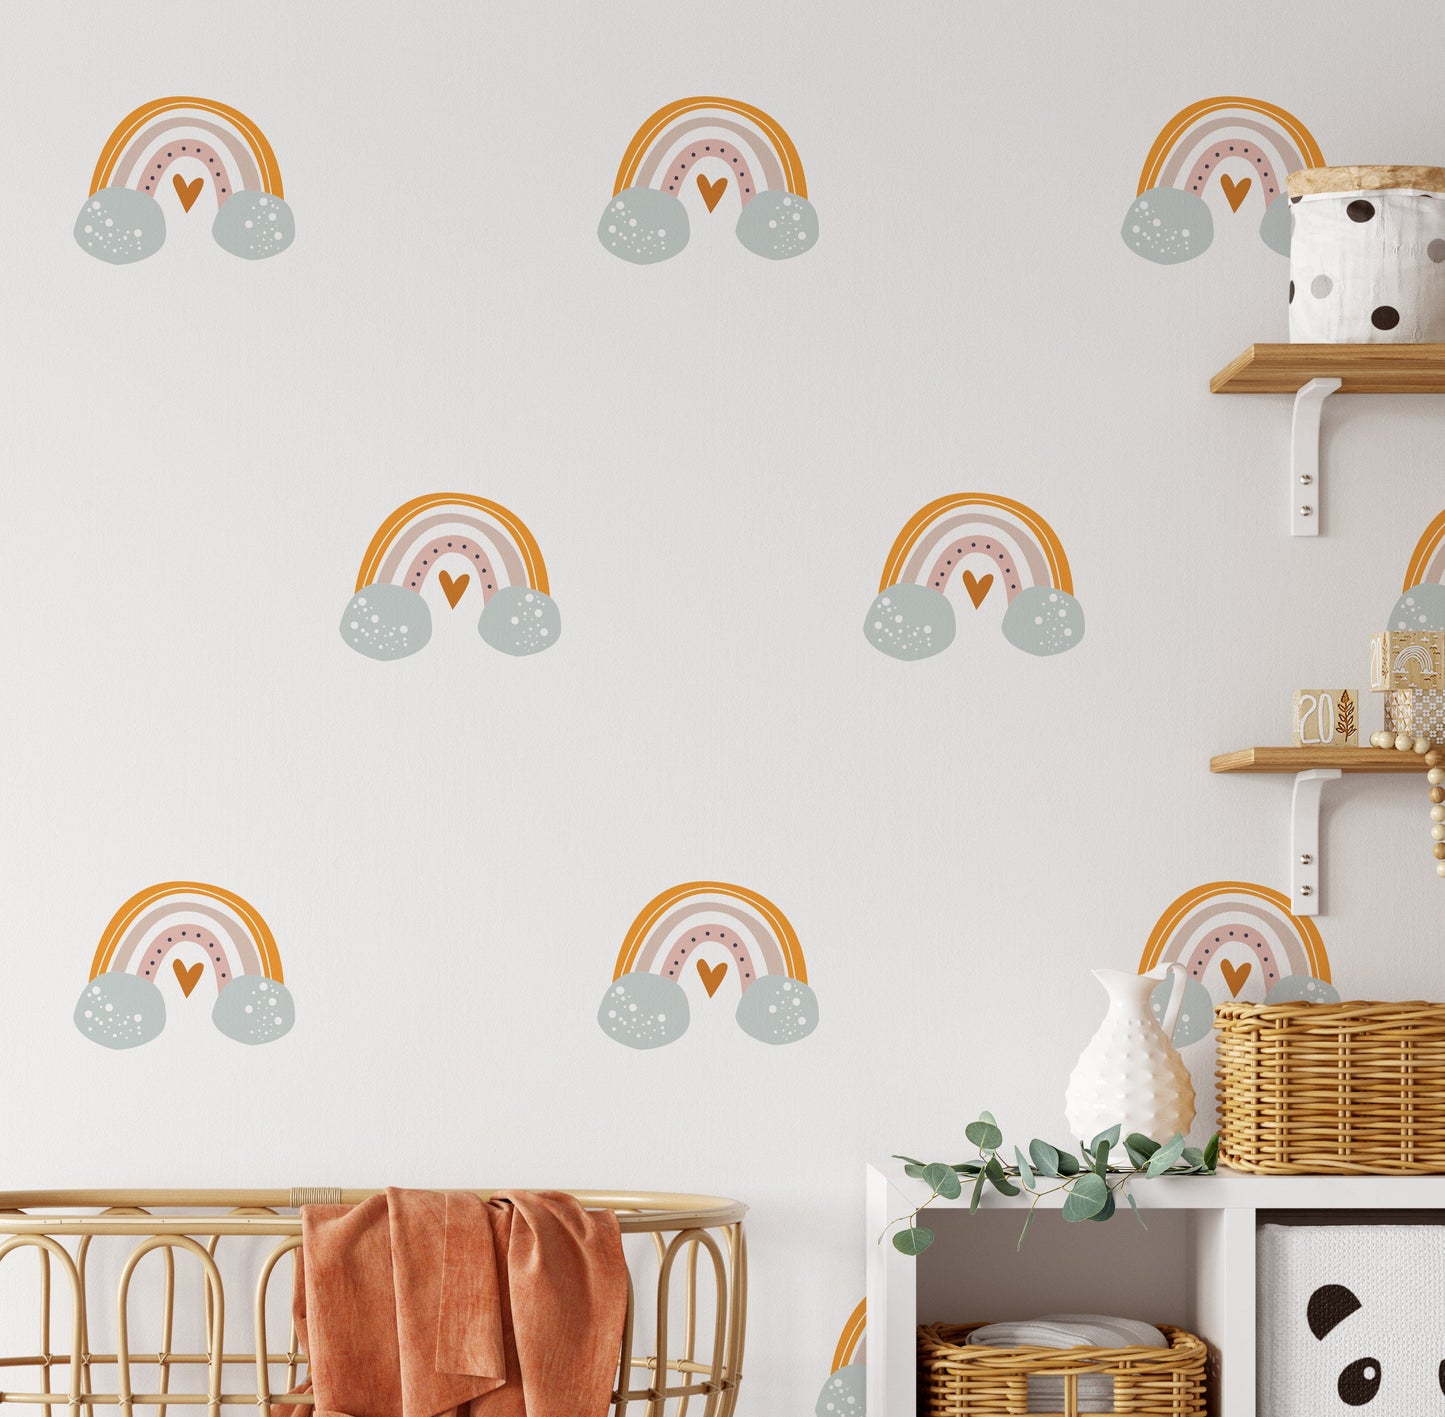 16 Large Pastel Rainbow Wall Stickers With Clouds